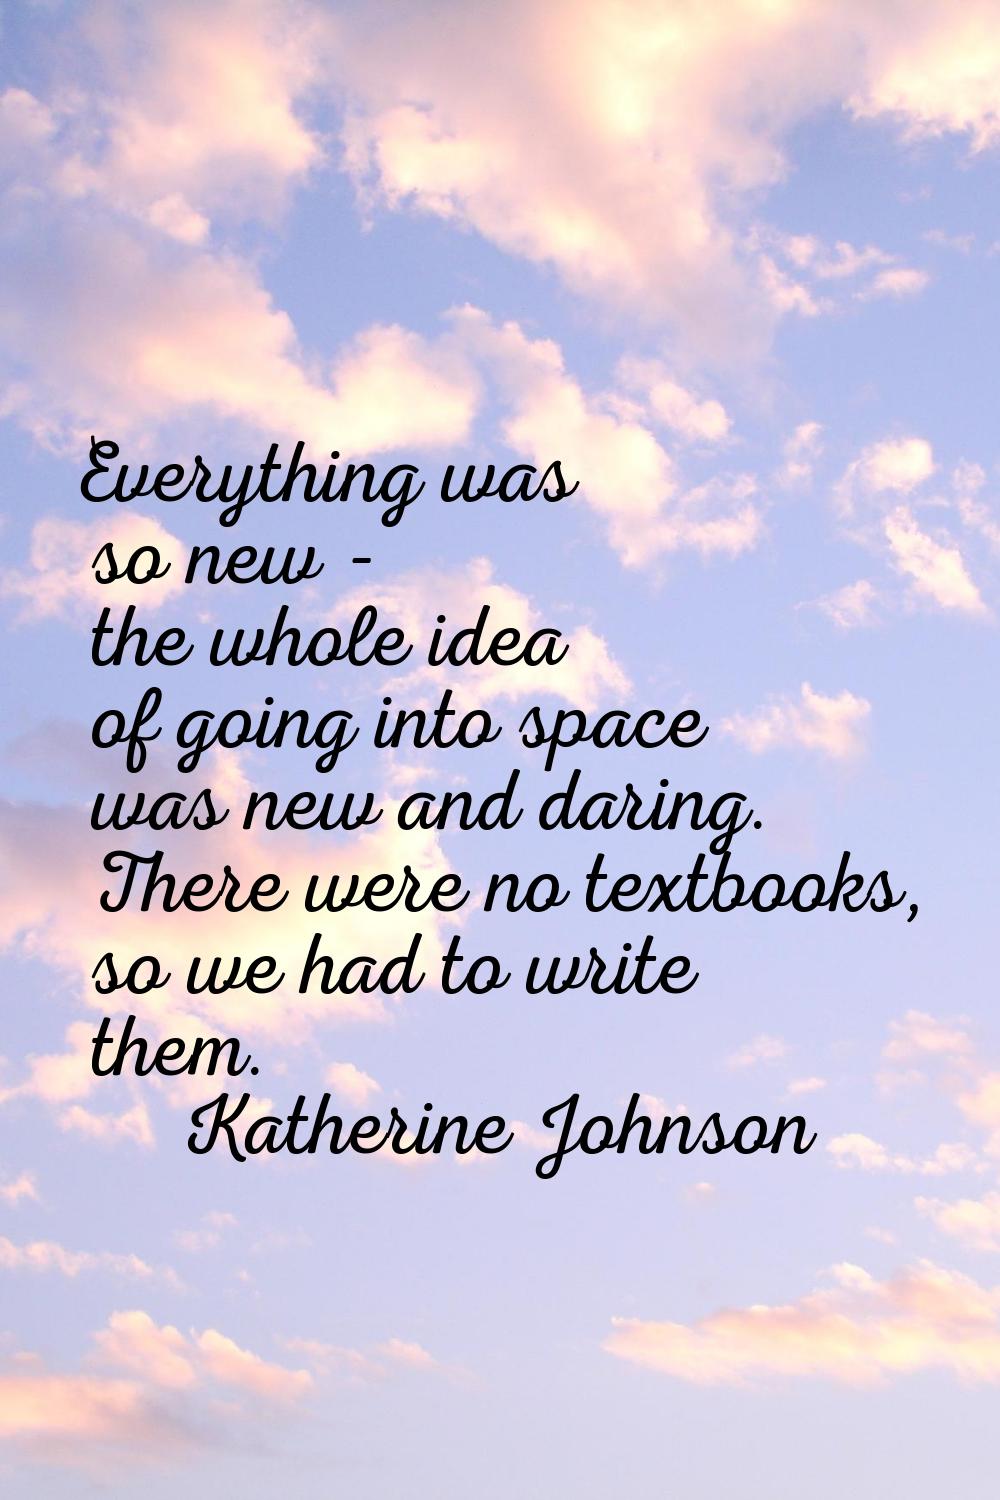 Everything was so new - the whole idea of going into space was new and daring. There were no textbo